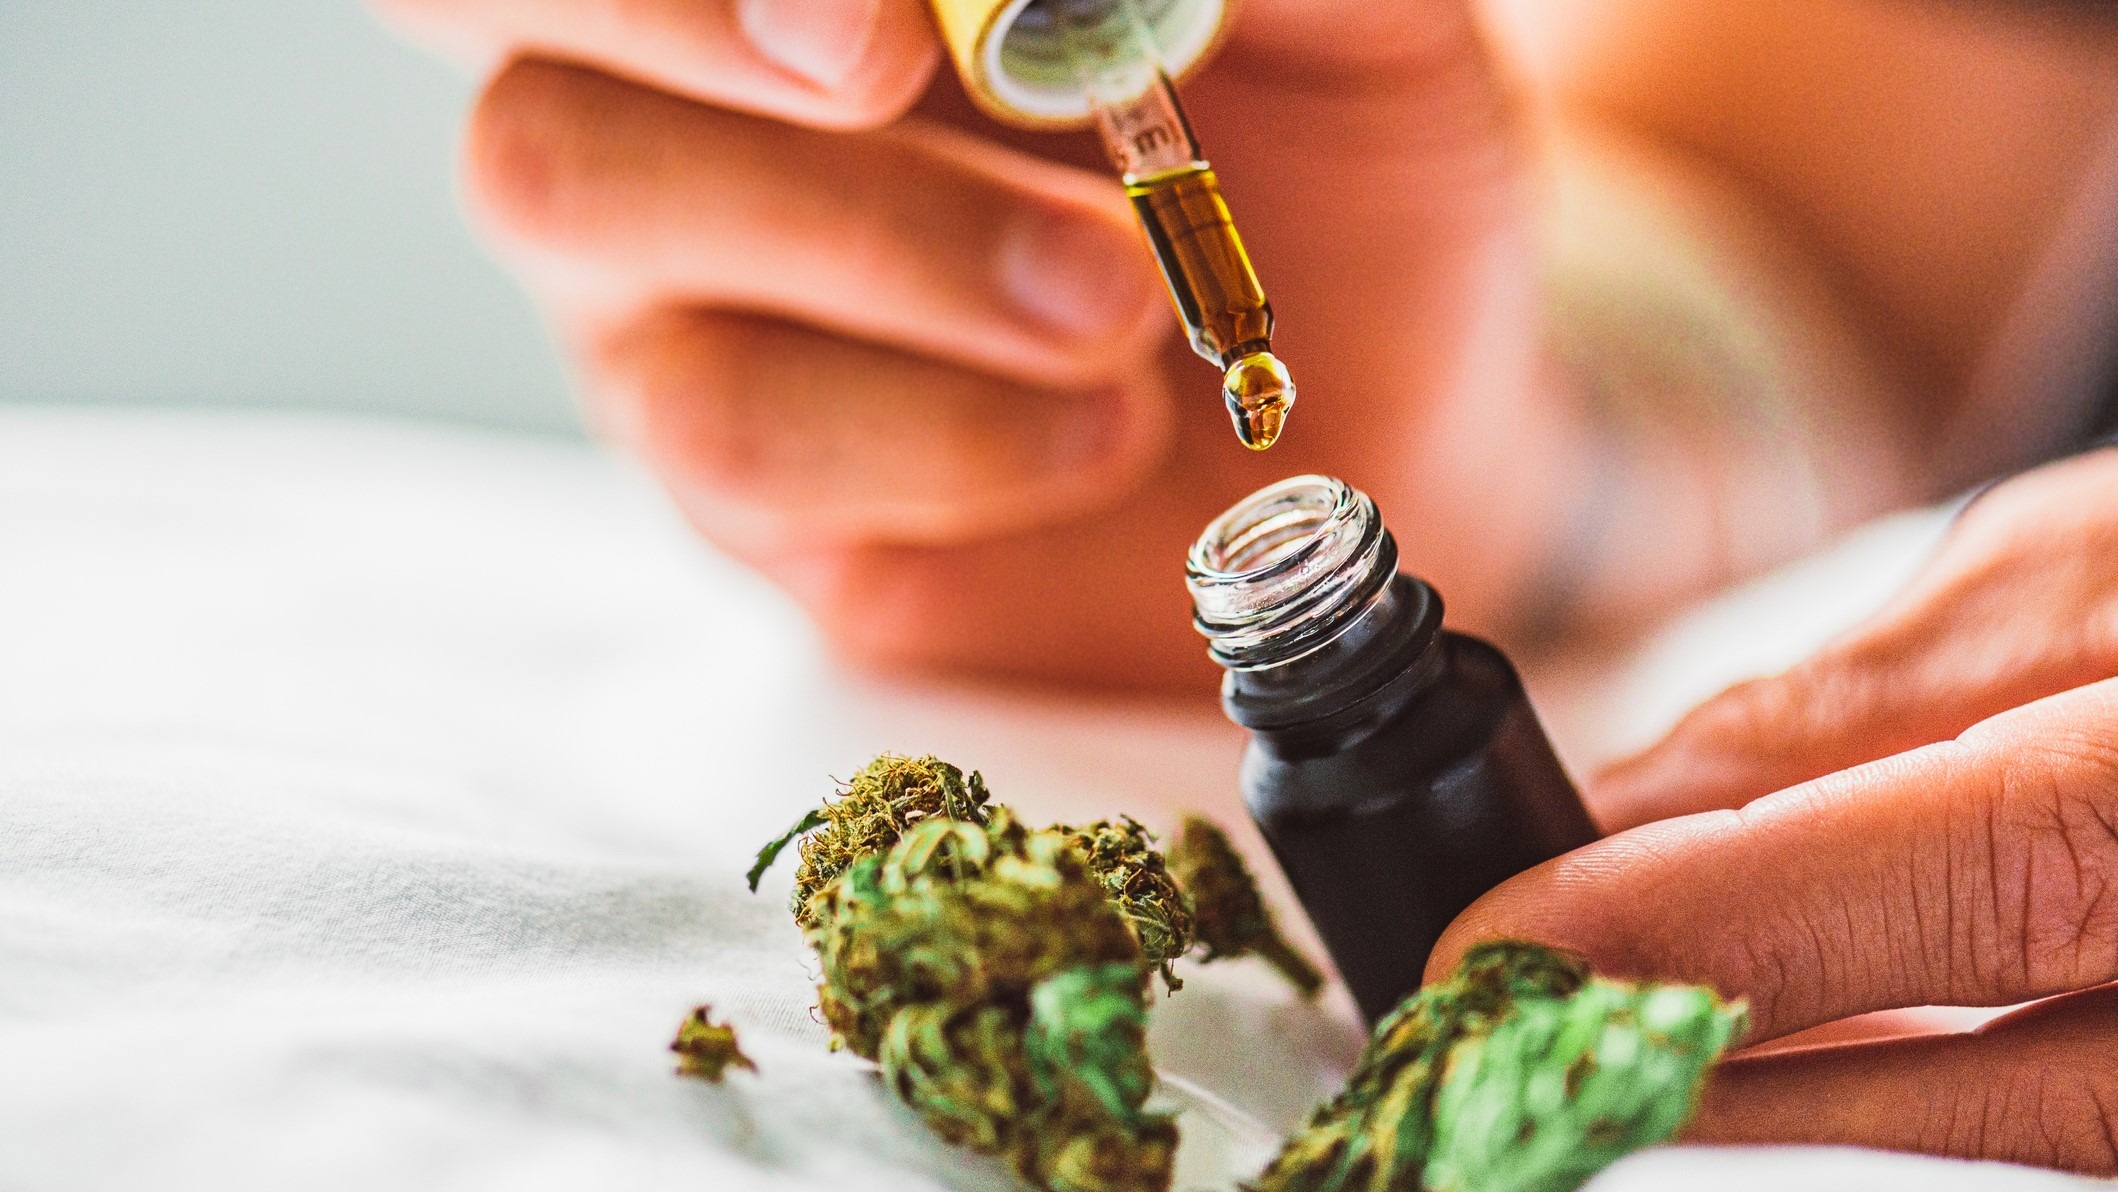 What Pharmacists Should Know About CBD